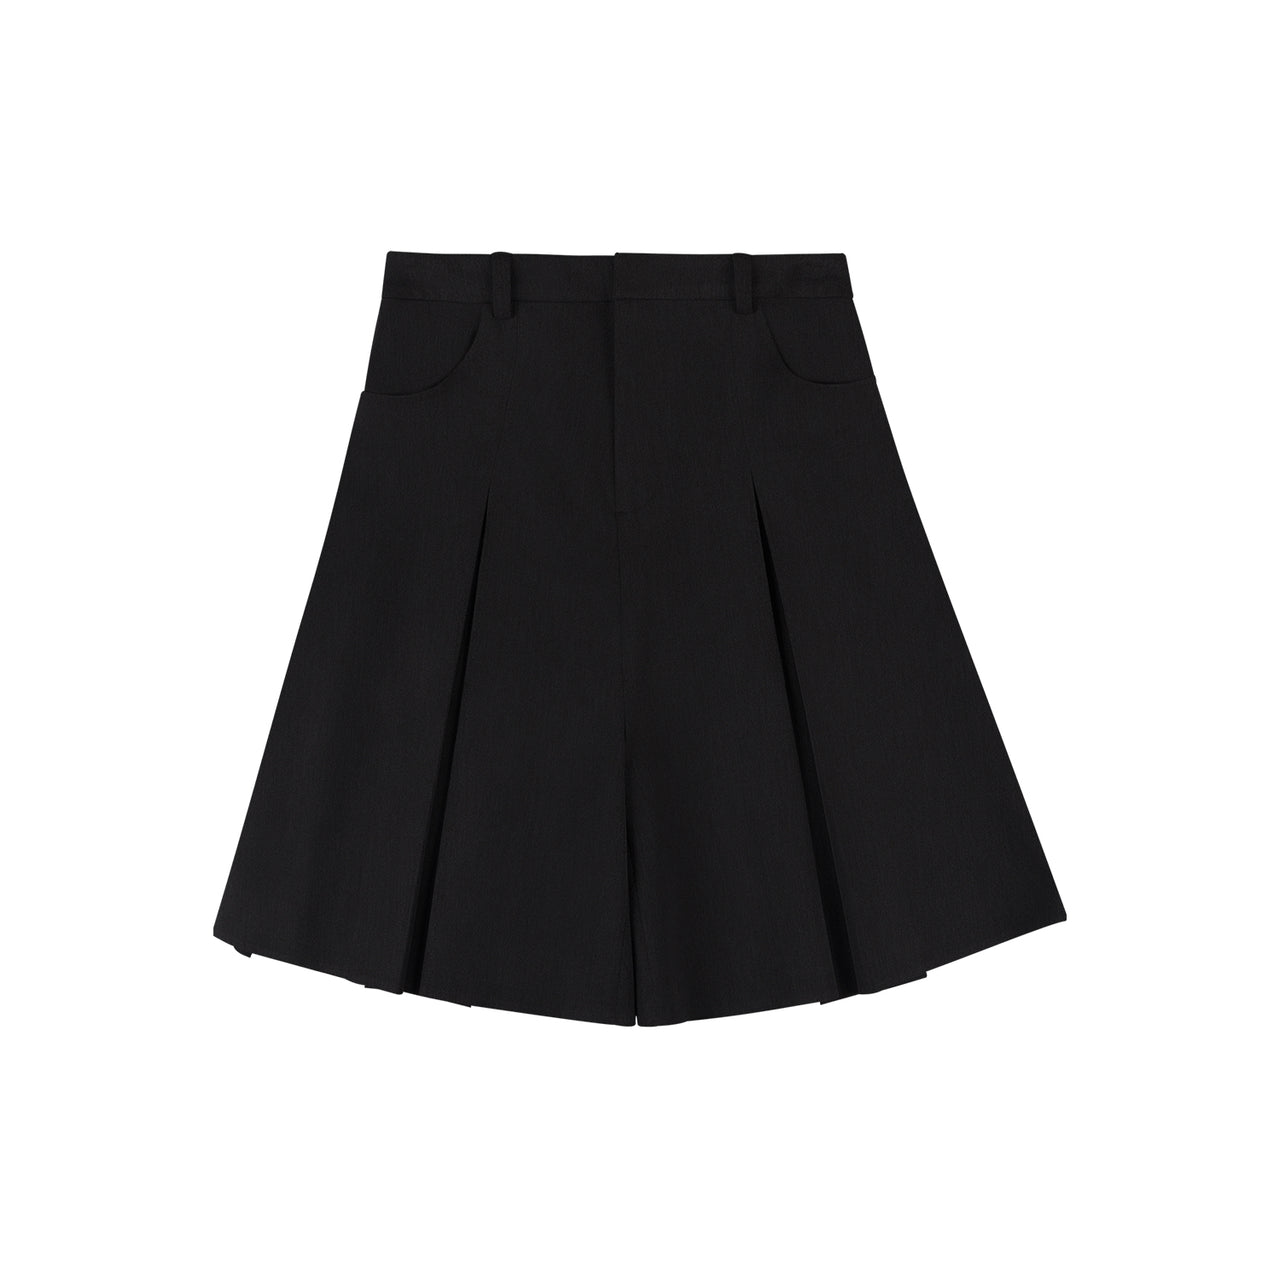 Four-Quarter With Combined Pleats Skirt